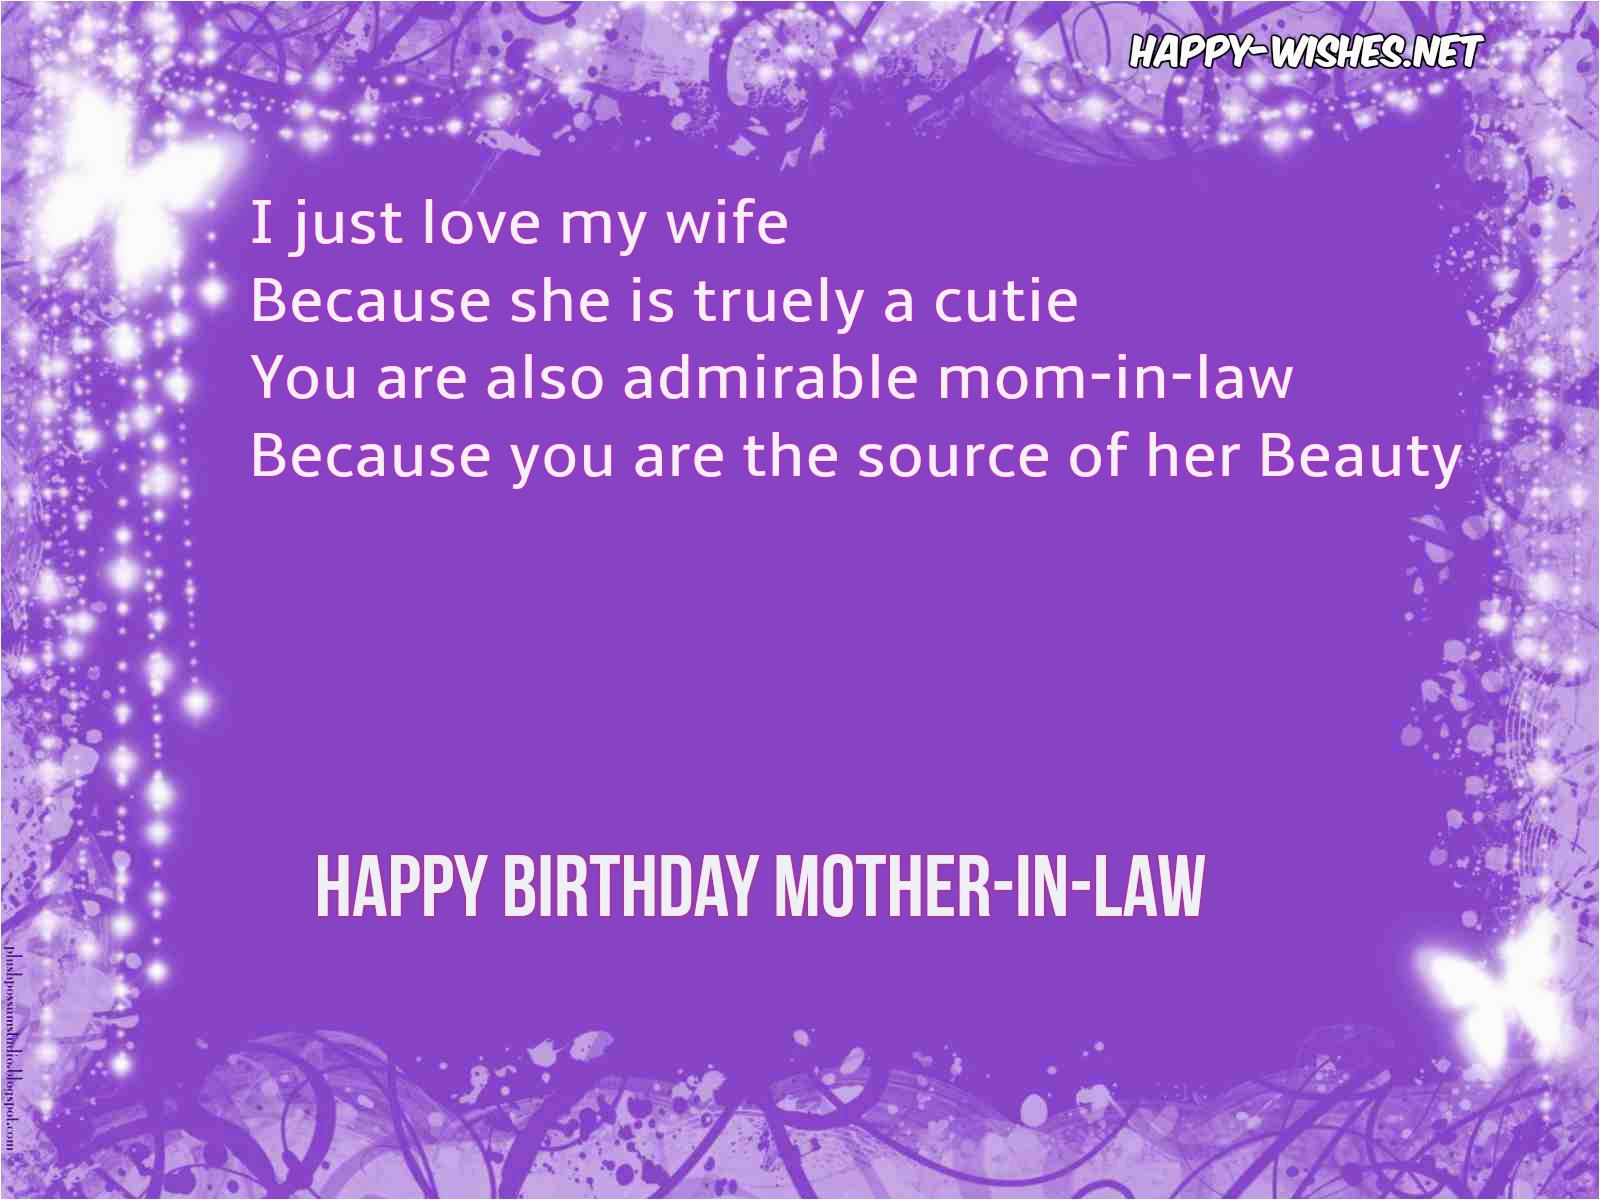 happy birthday wishes mother law quotes images